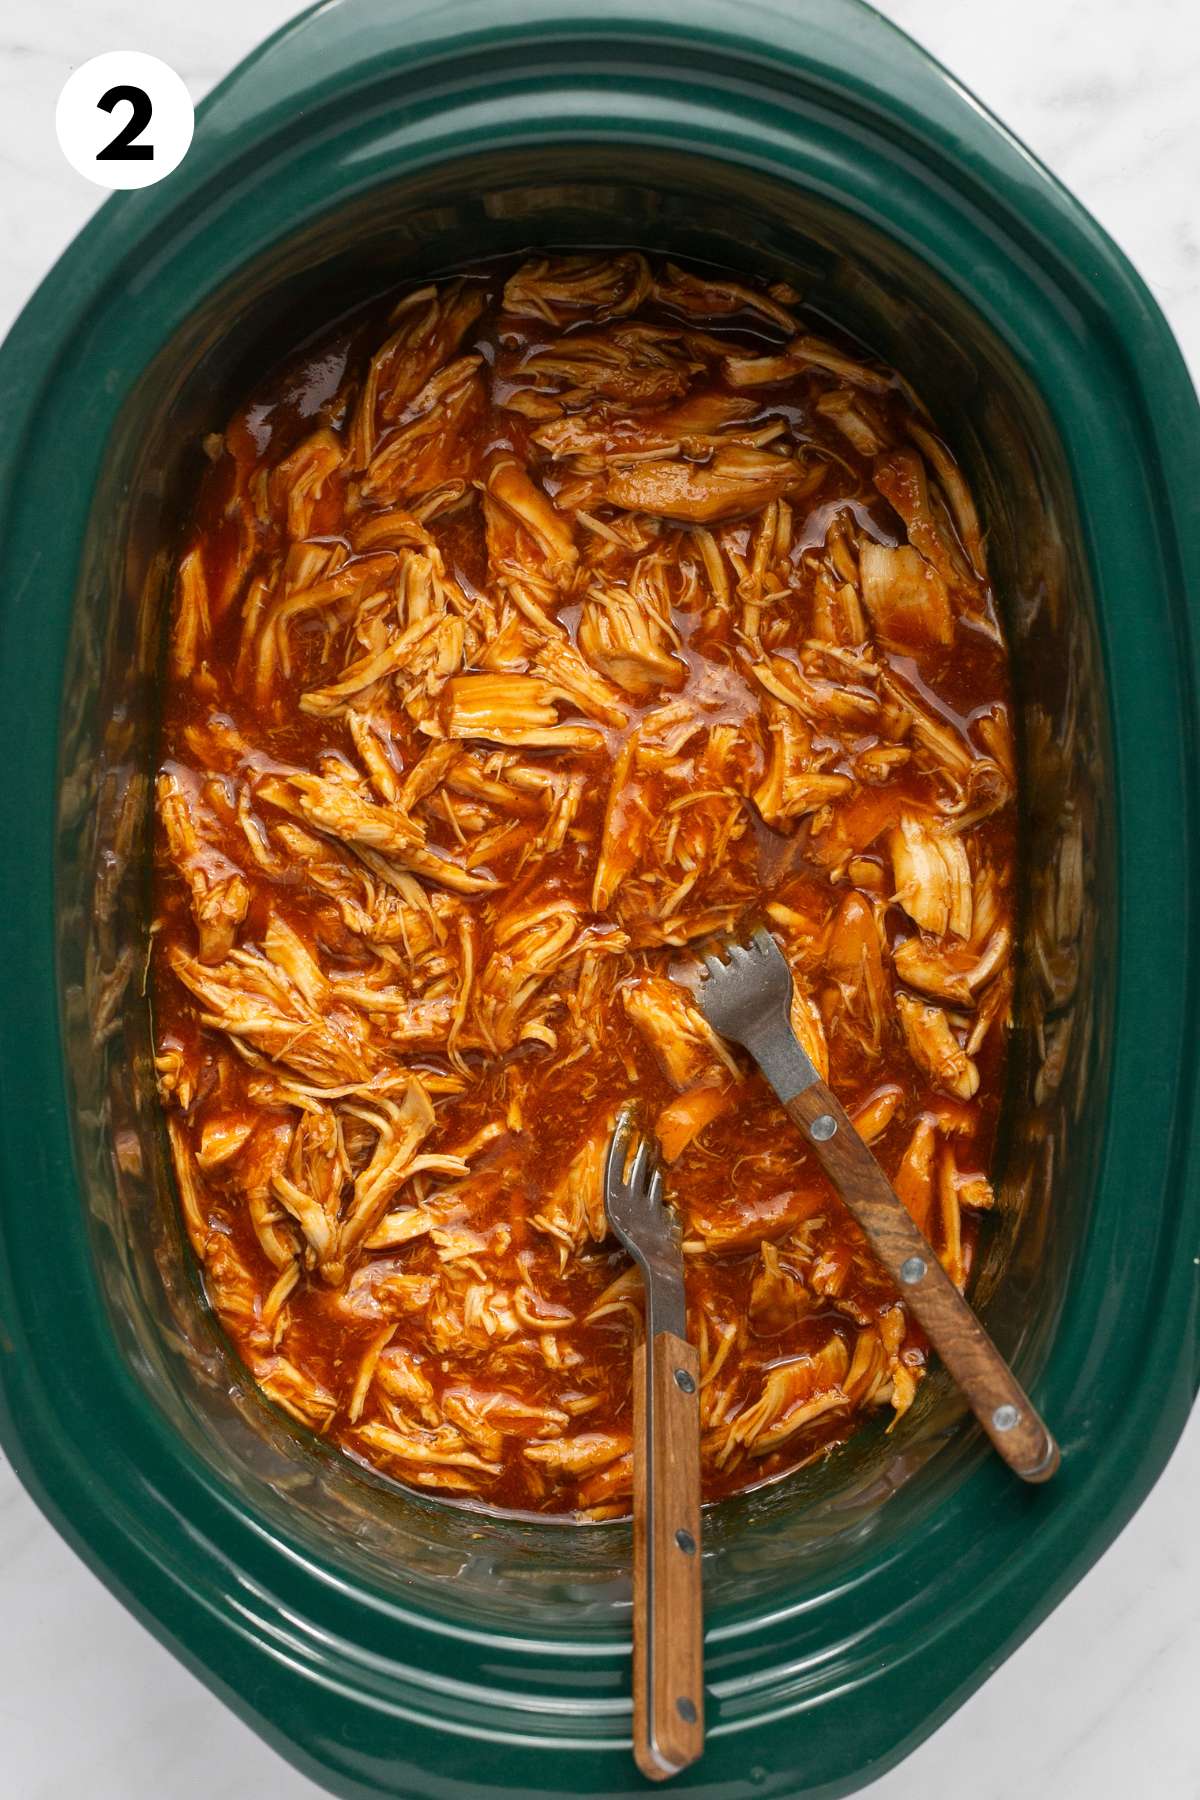 This Healthy Crockpot BBQ Chicken recipe is perfect for meal prep for make ahead lunch and dinner. Protein packed & made low in sugar with only 3 ingredients. A healthy meal & the crockpot does all the work! Gluten Free + Low Calorie